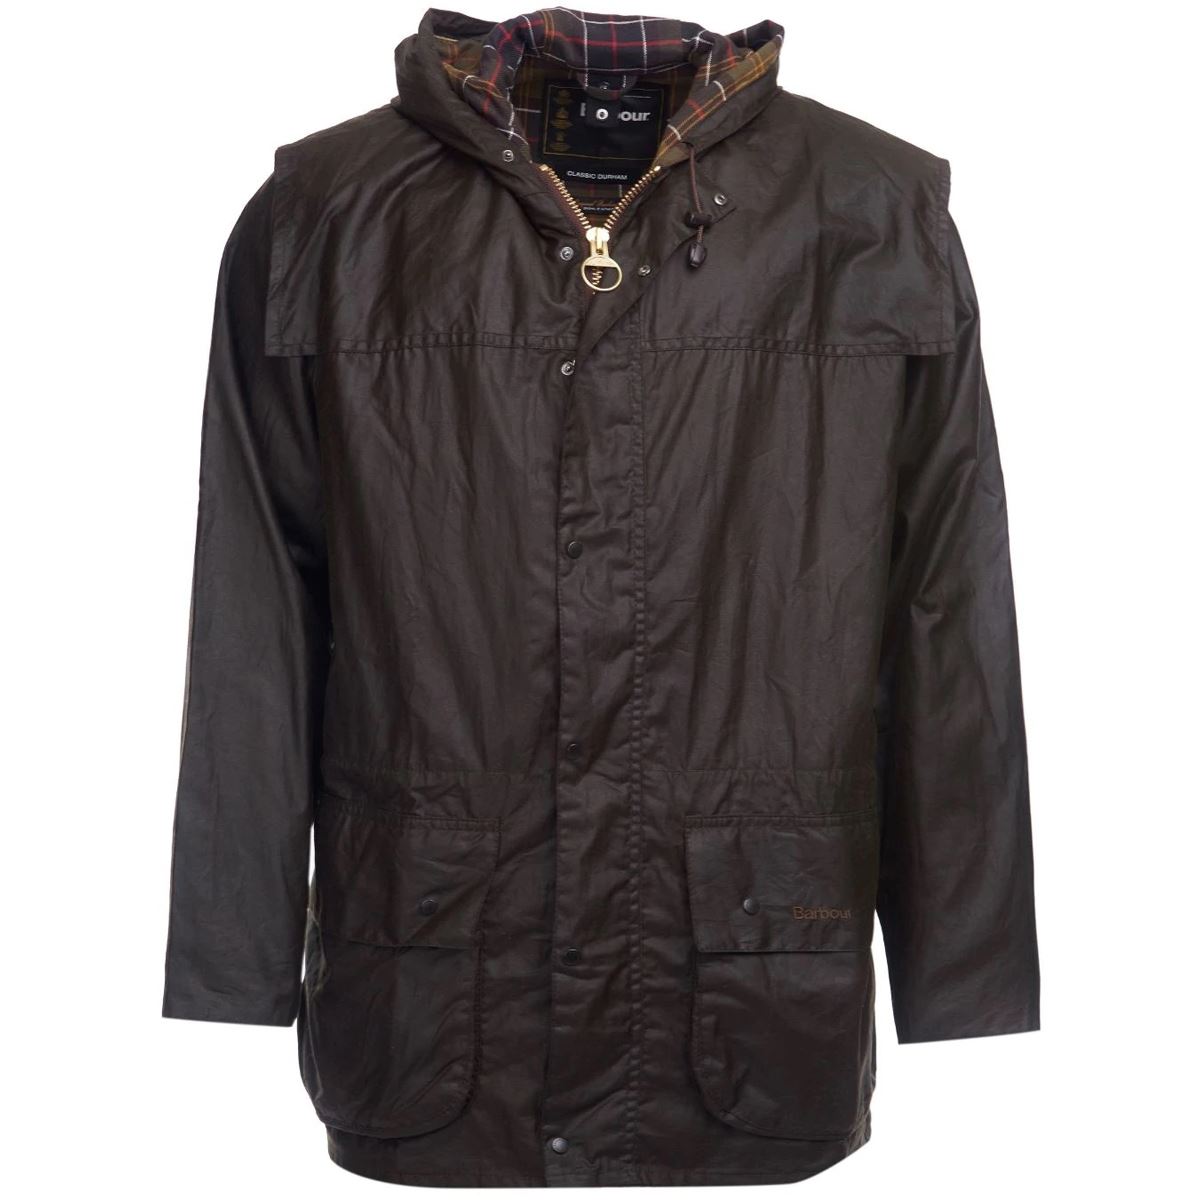 Where is the Barbour Durham Jacket for men made?